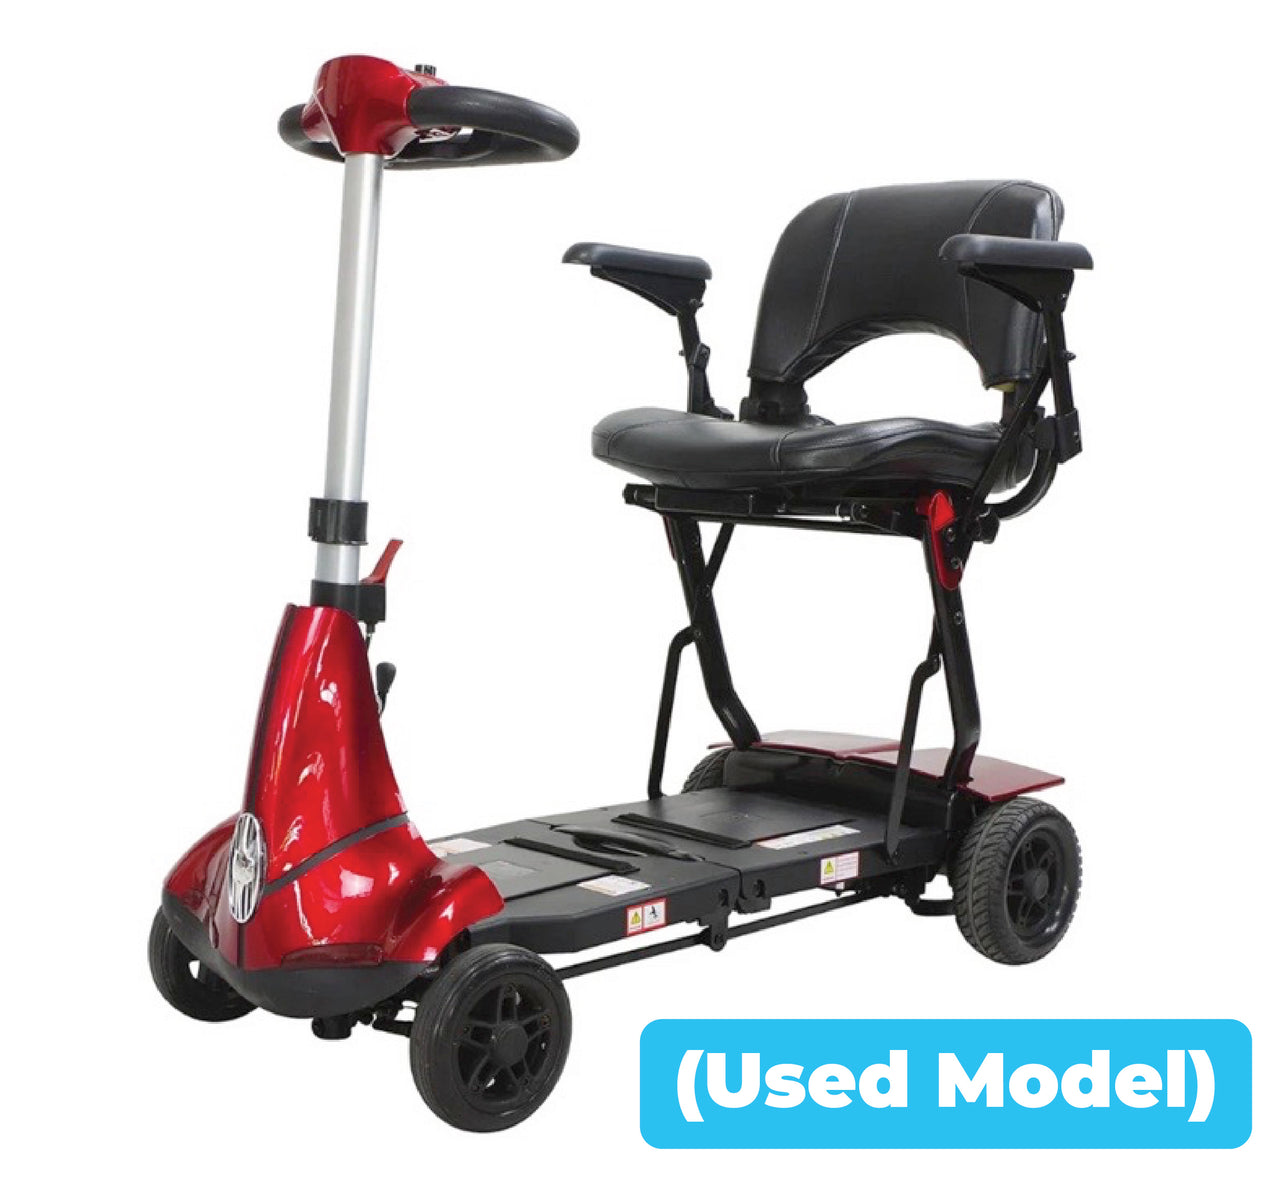 Solax Mobie Plus Folding Lightweight Travel Scooters (Used Model)